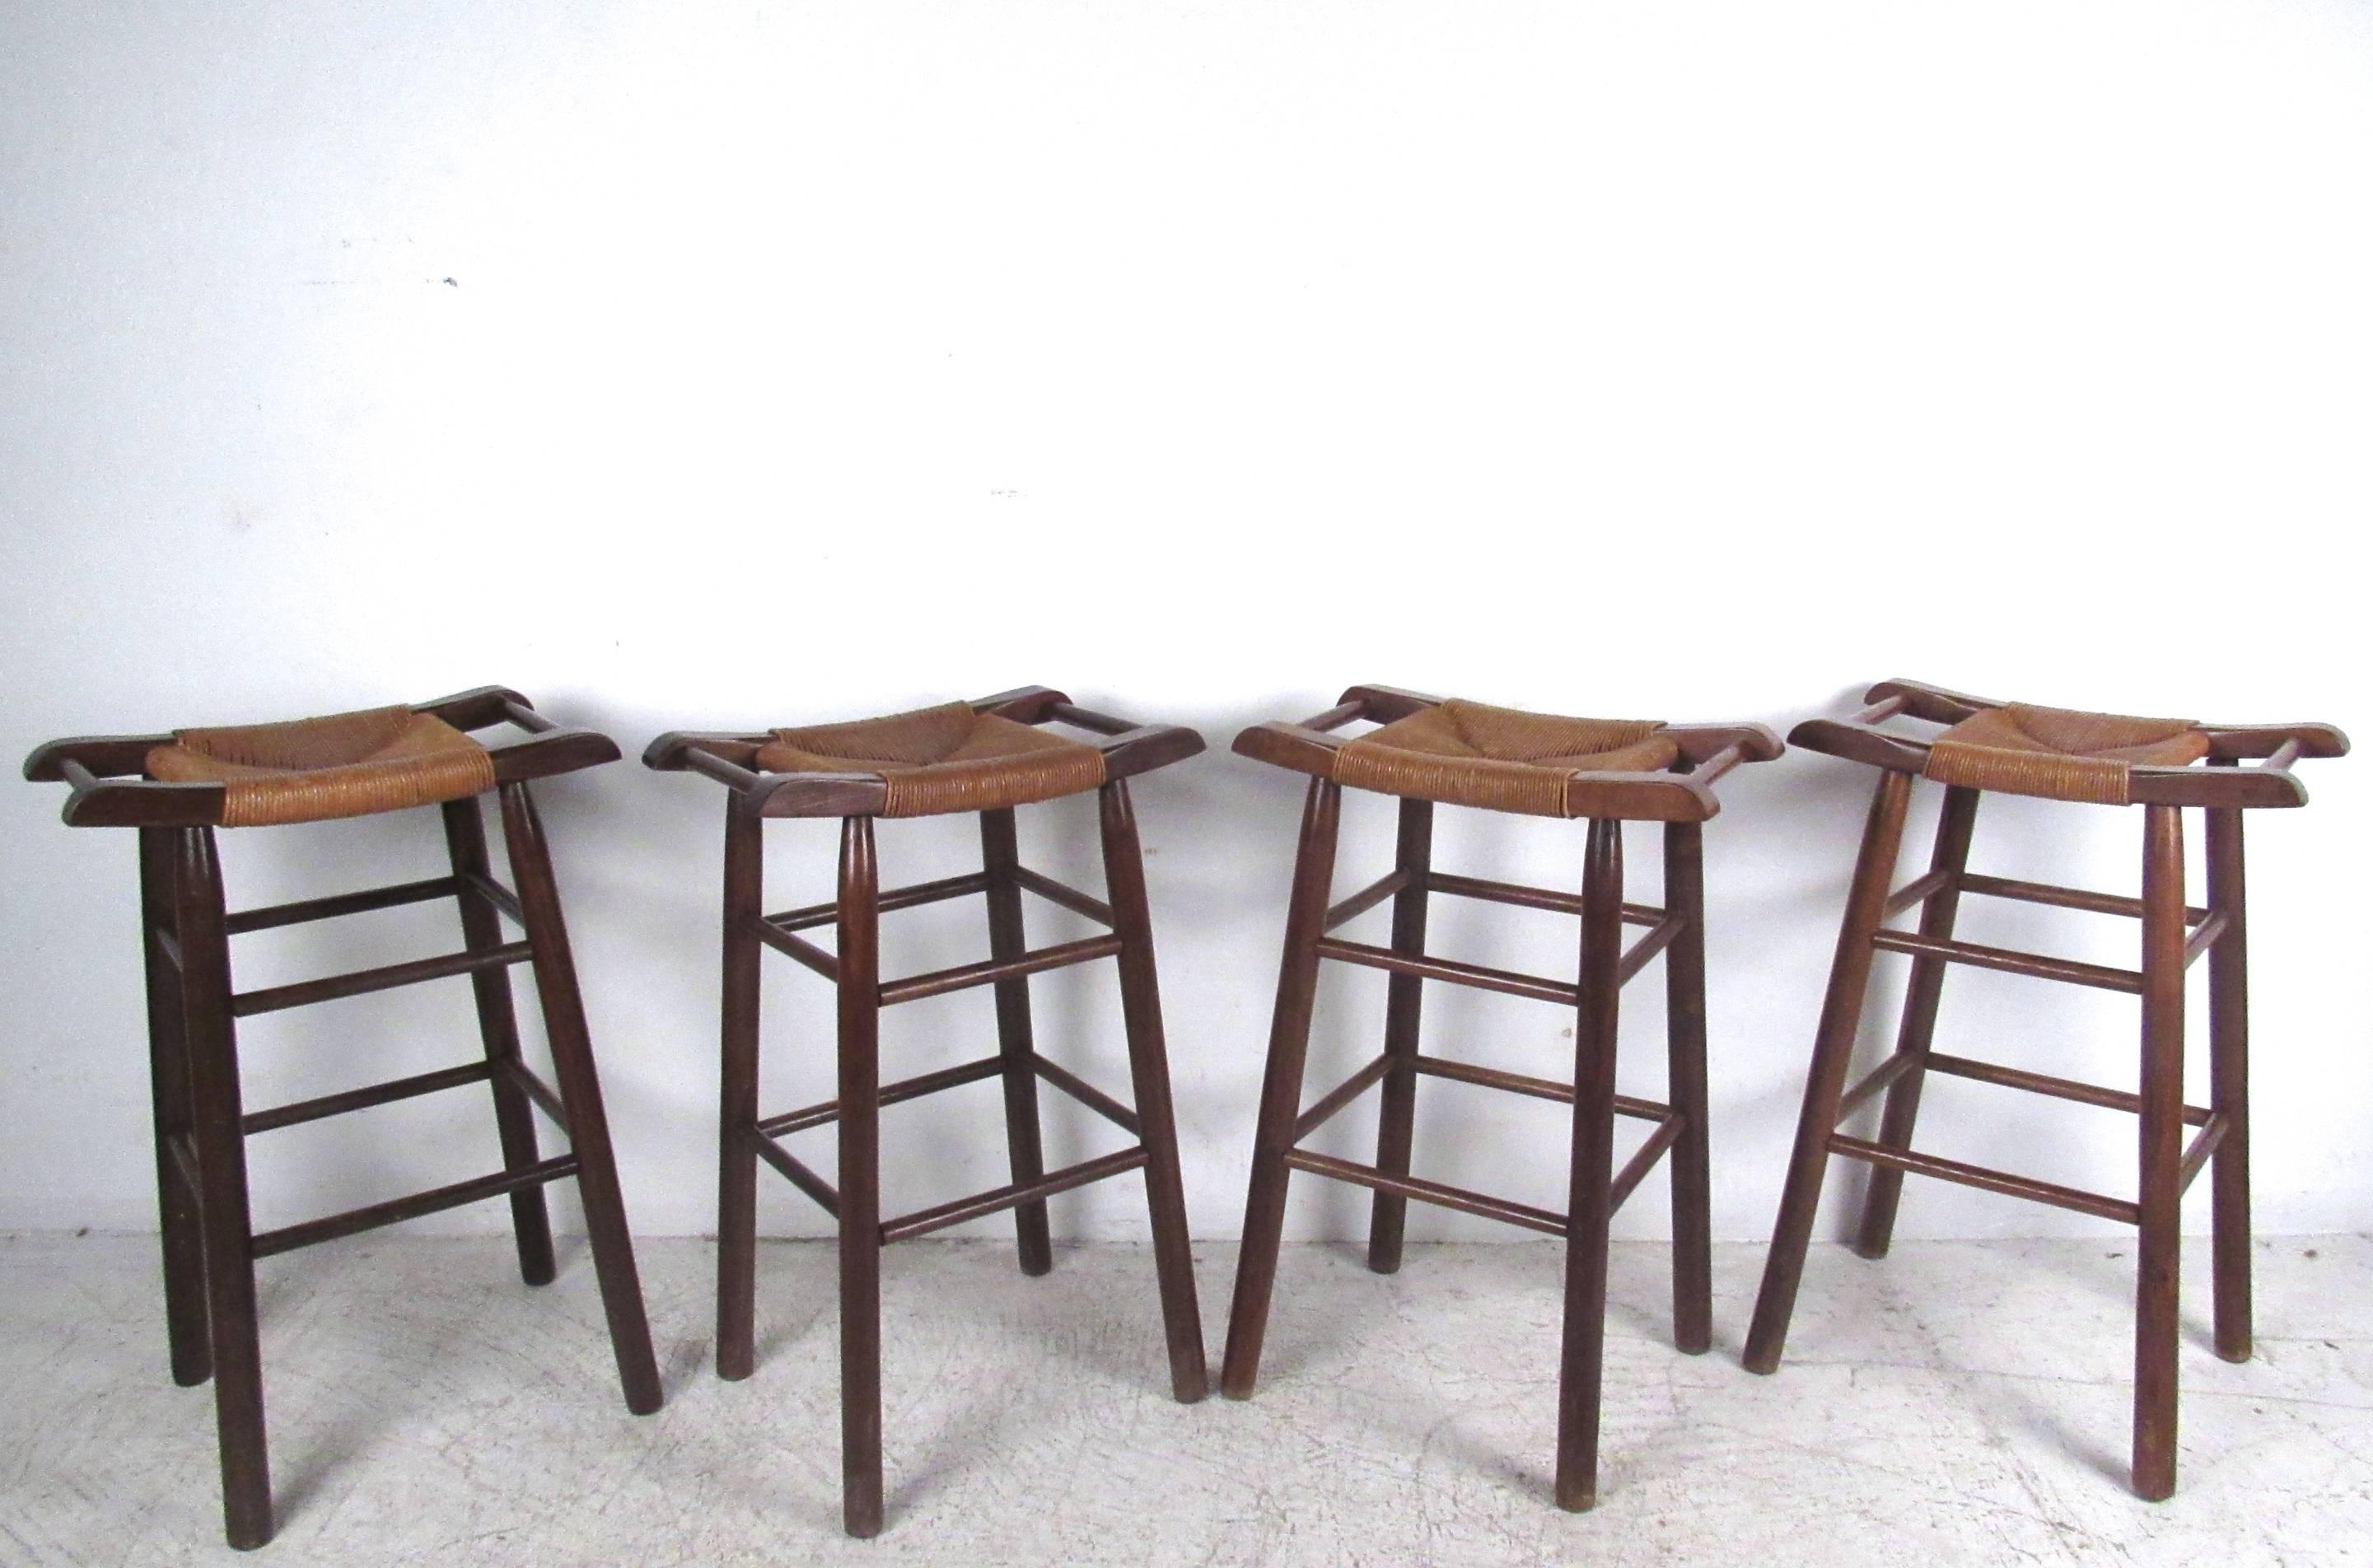 This set of hardwood stools features wide rush seats with unique side handles. Vintage rustic style for bar or counter seating in any setting. Please confirm item location (NY or NJ).